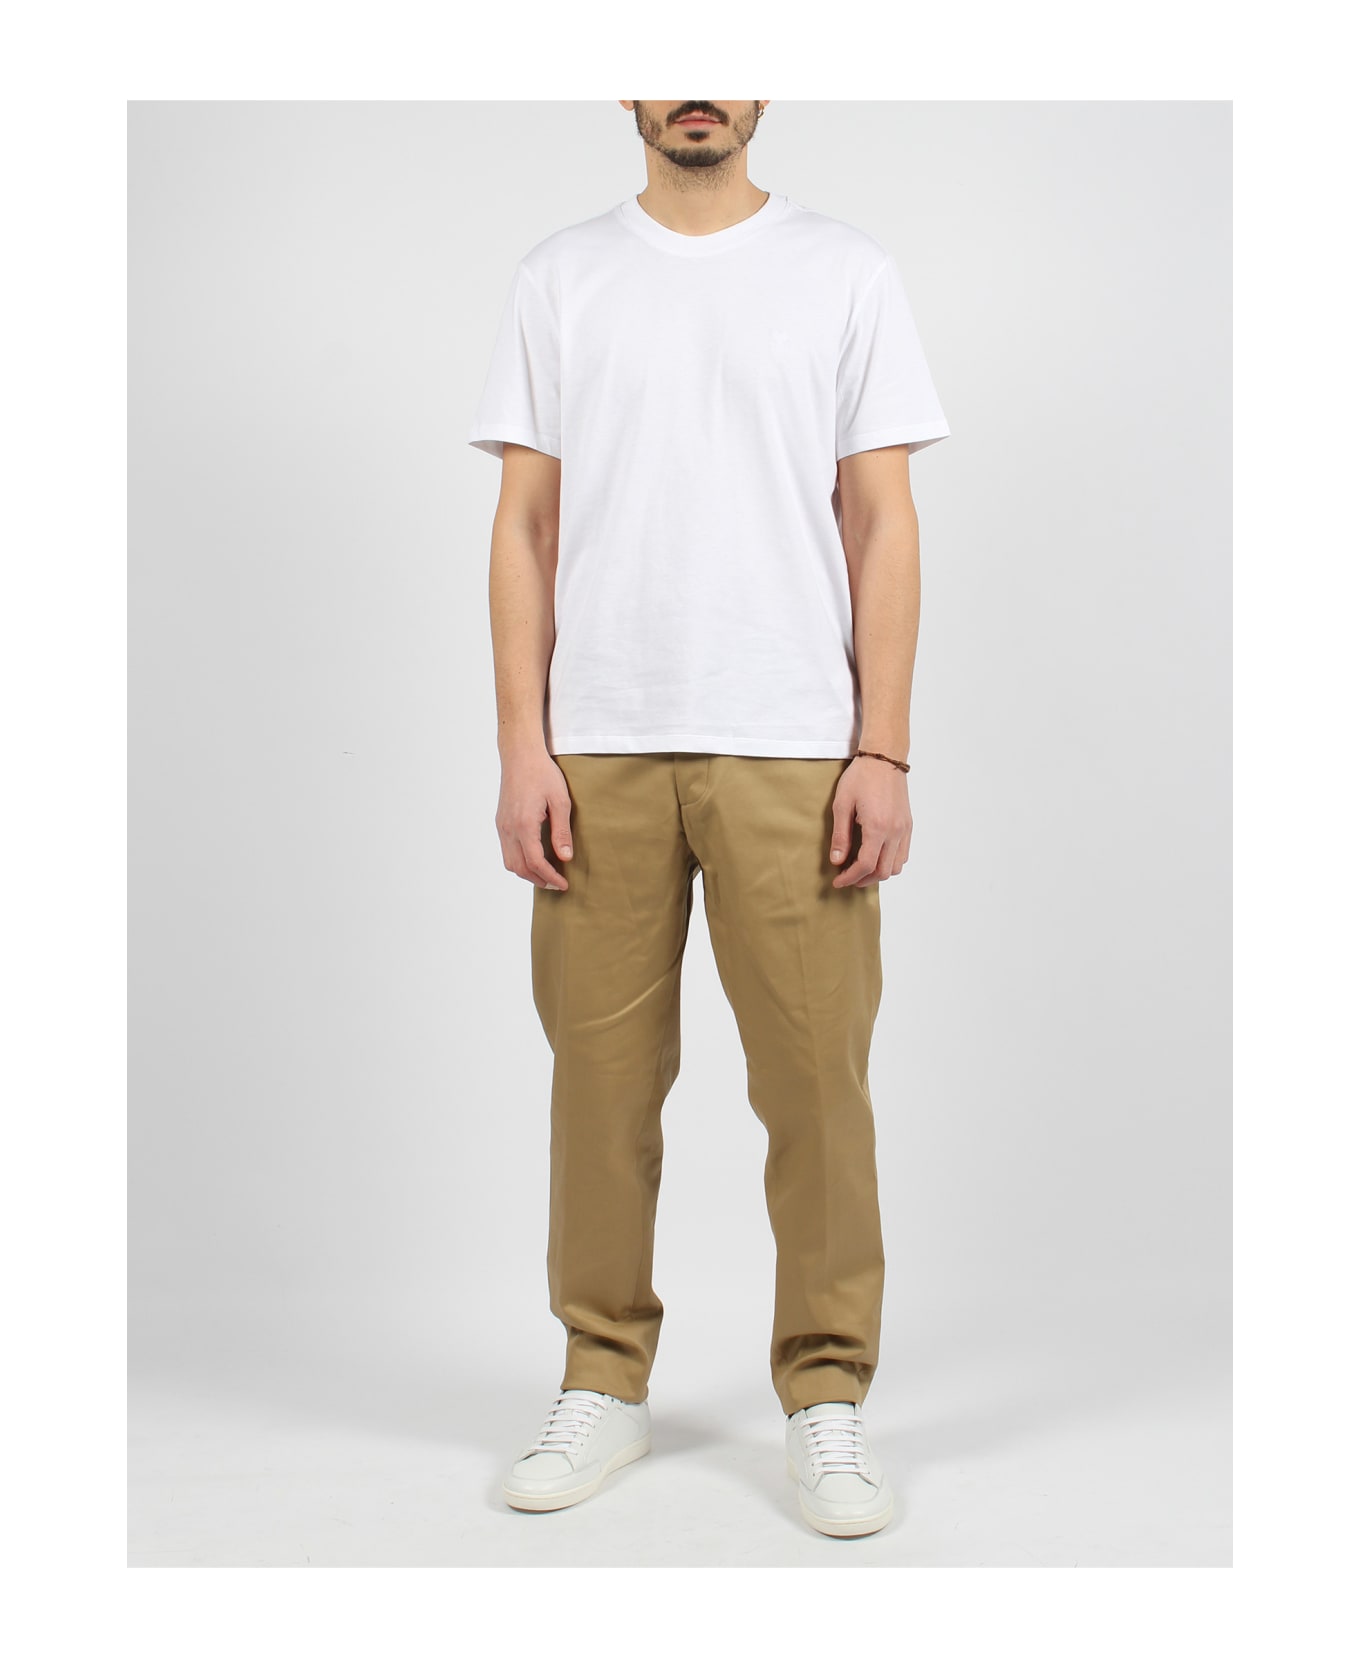 Nine in the Morning Giove Slim Chino Pant - Brown